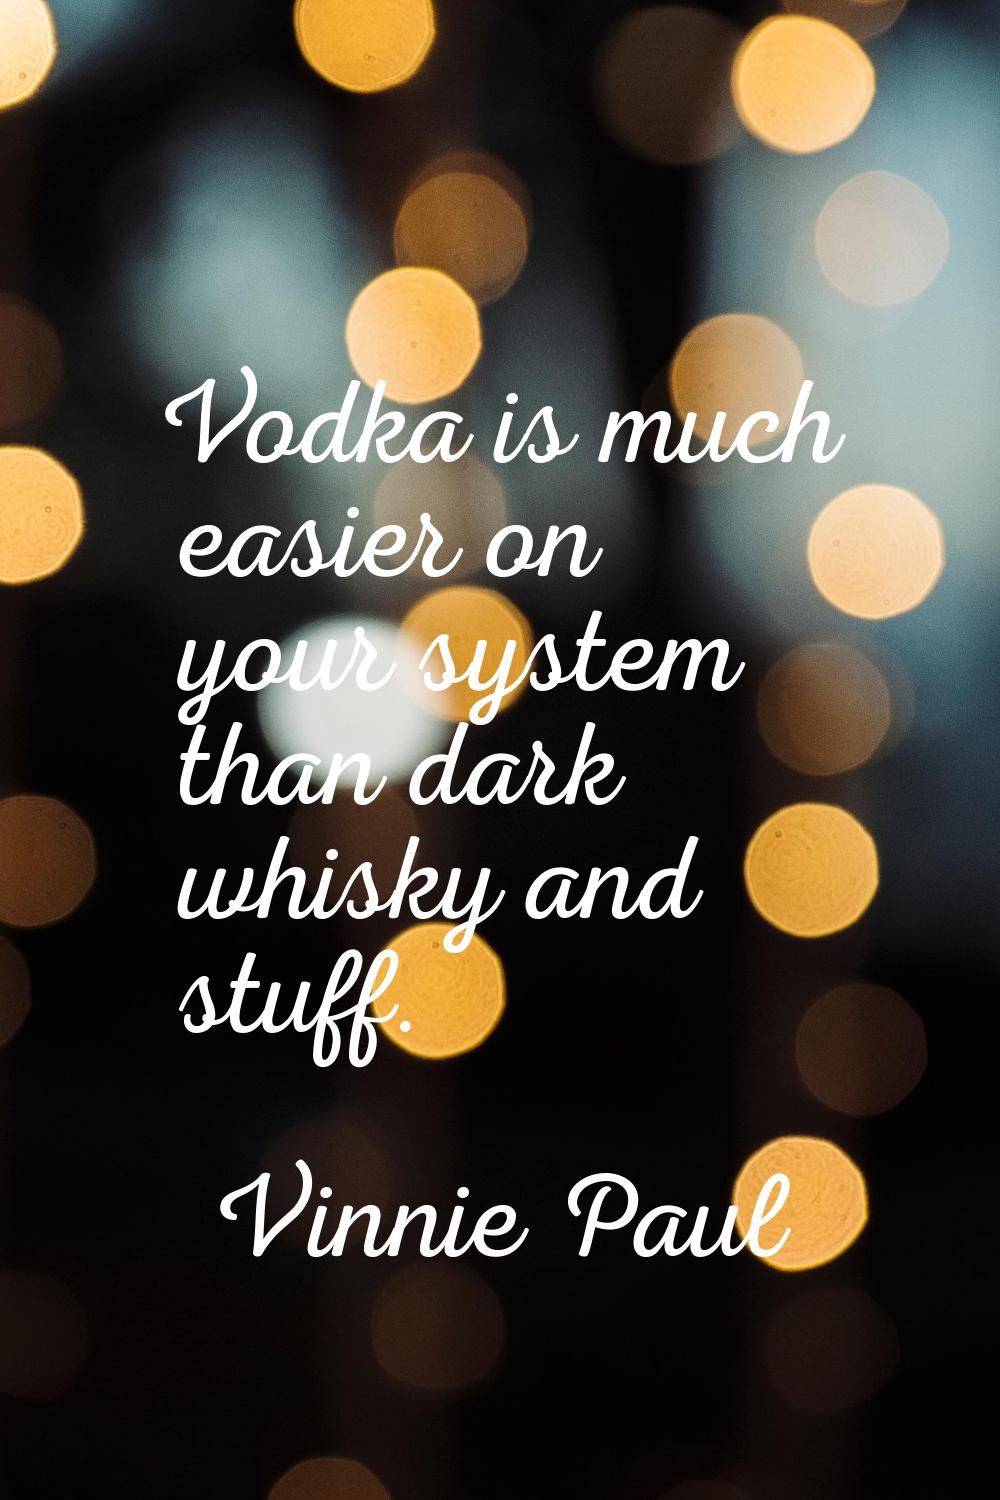 Vodka is much easier on your system than dark whisky and stuff.